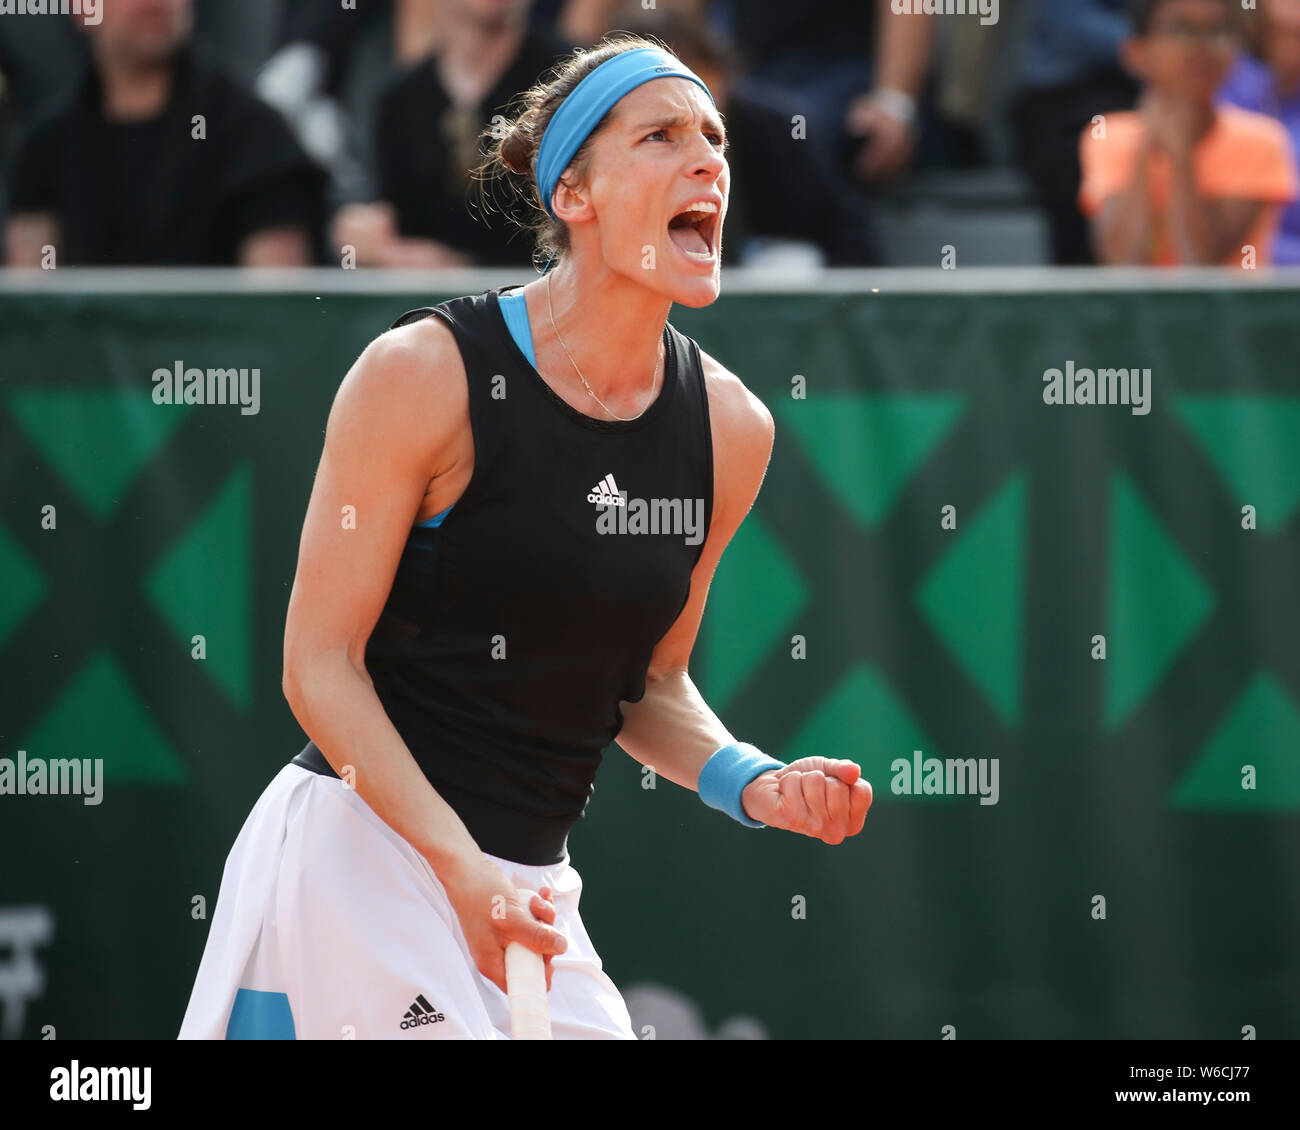 German tennis player Andrea Petkovic celebrating match point during French  Open 2019 tennis tournament, Paris, France Stock Photo - Alamy